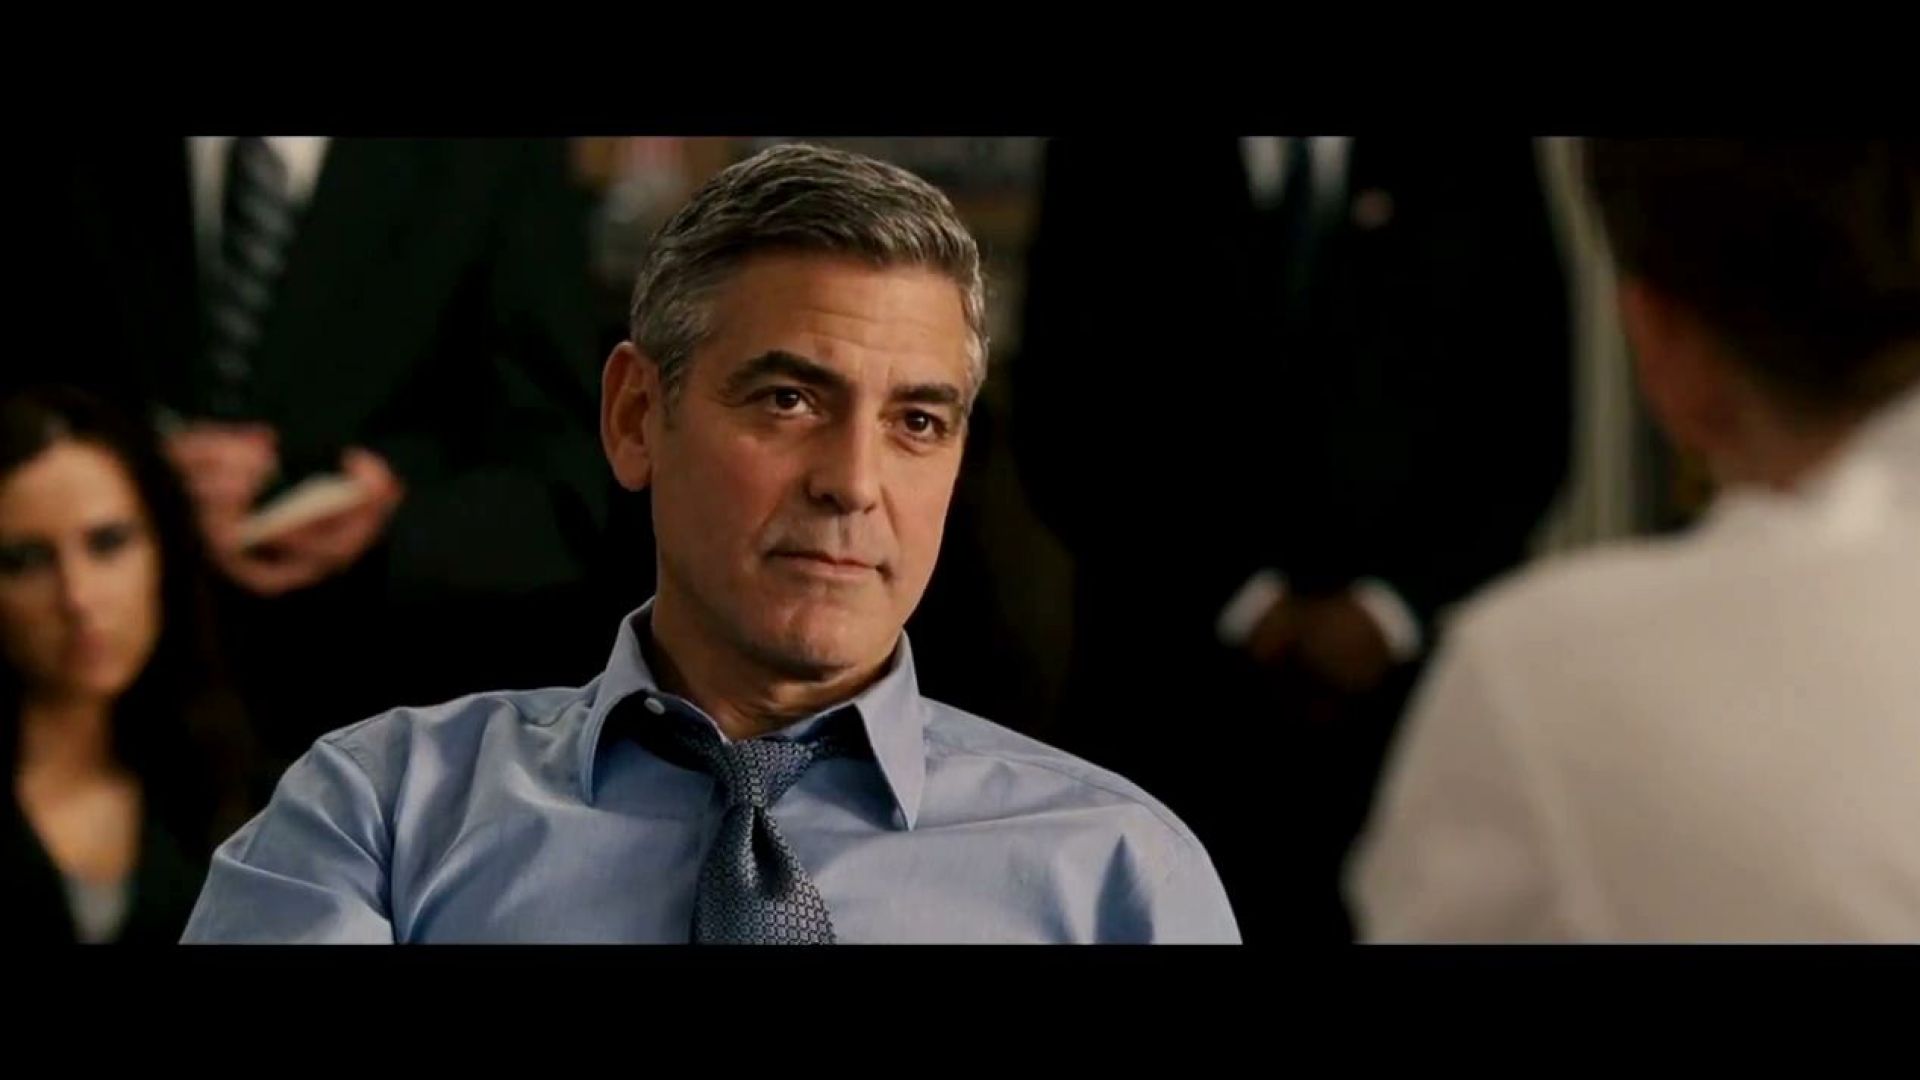 George Clooney and Ryan Gosling discuss mandatory service in The Ides of March